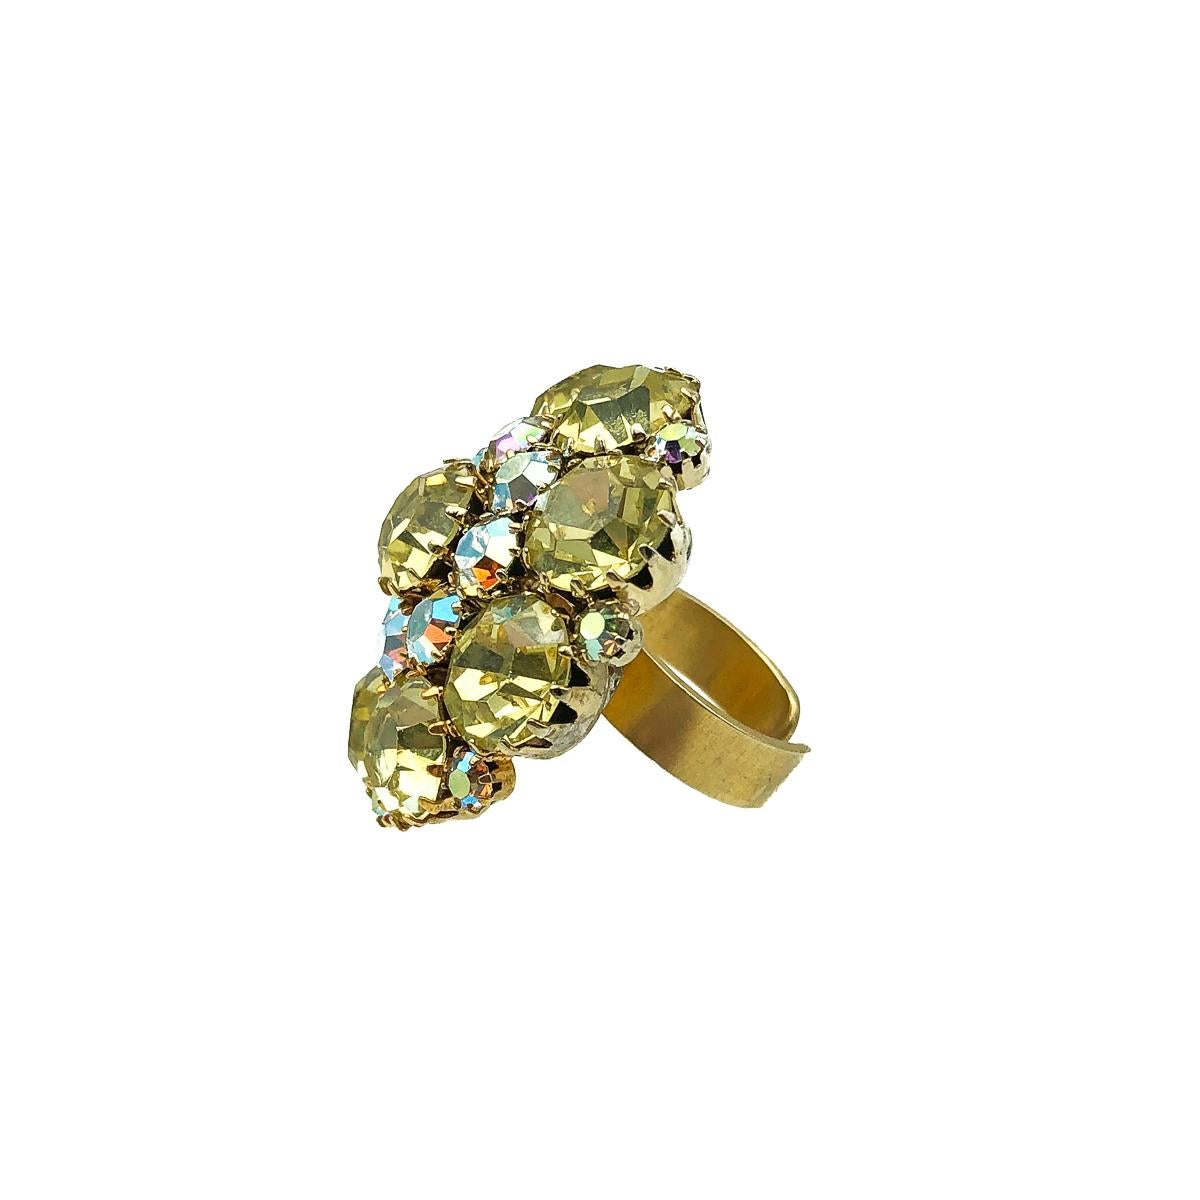 A statement Vintage Lemon Cocktail Ring. Featuring large claw set acid yellow crystal stones with aurora borealis crystals. Most likely a professionally converted ring comprising a glorious original 1950s brooch for the top teamed with a modern